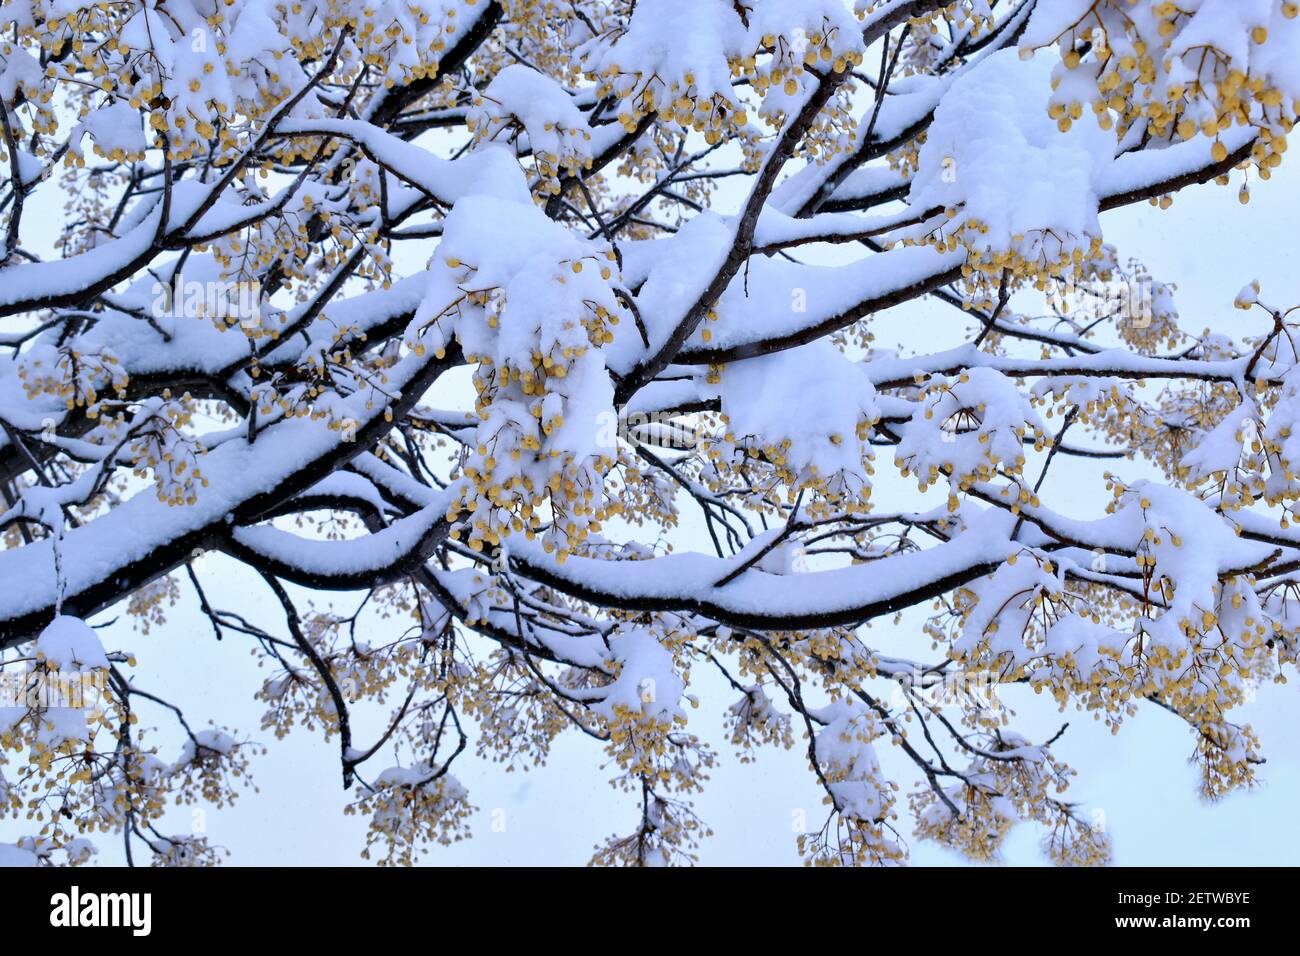 Snowy tree. Branches of trees covered with snow in the unusual and great snowfall of the City of Madrid, during the passage of the snow storm Filomena Stock Photo